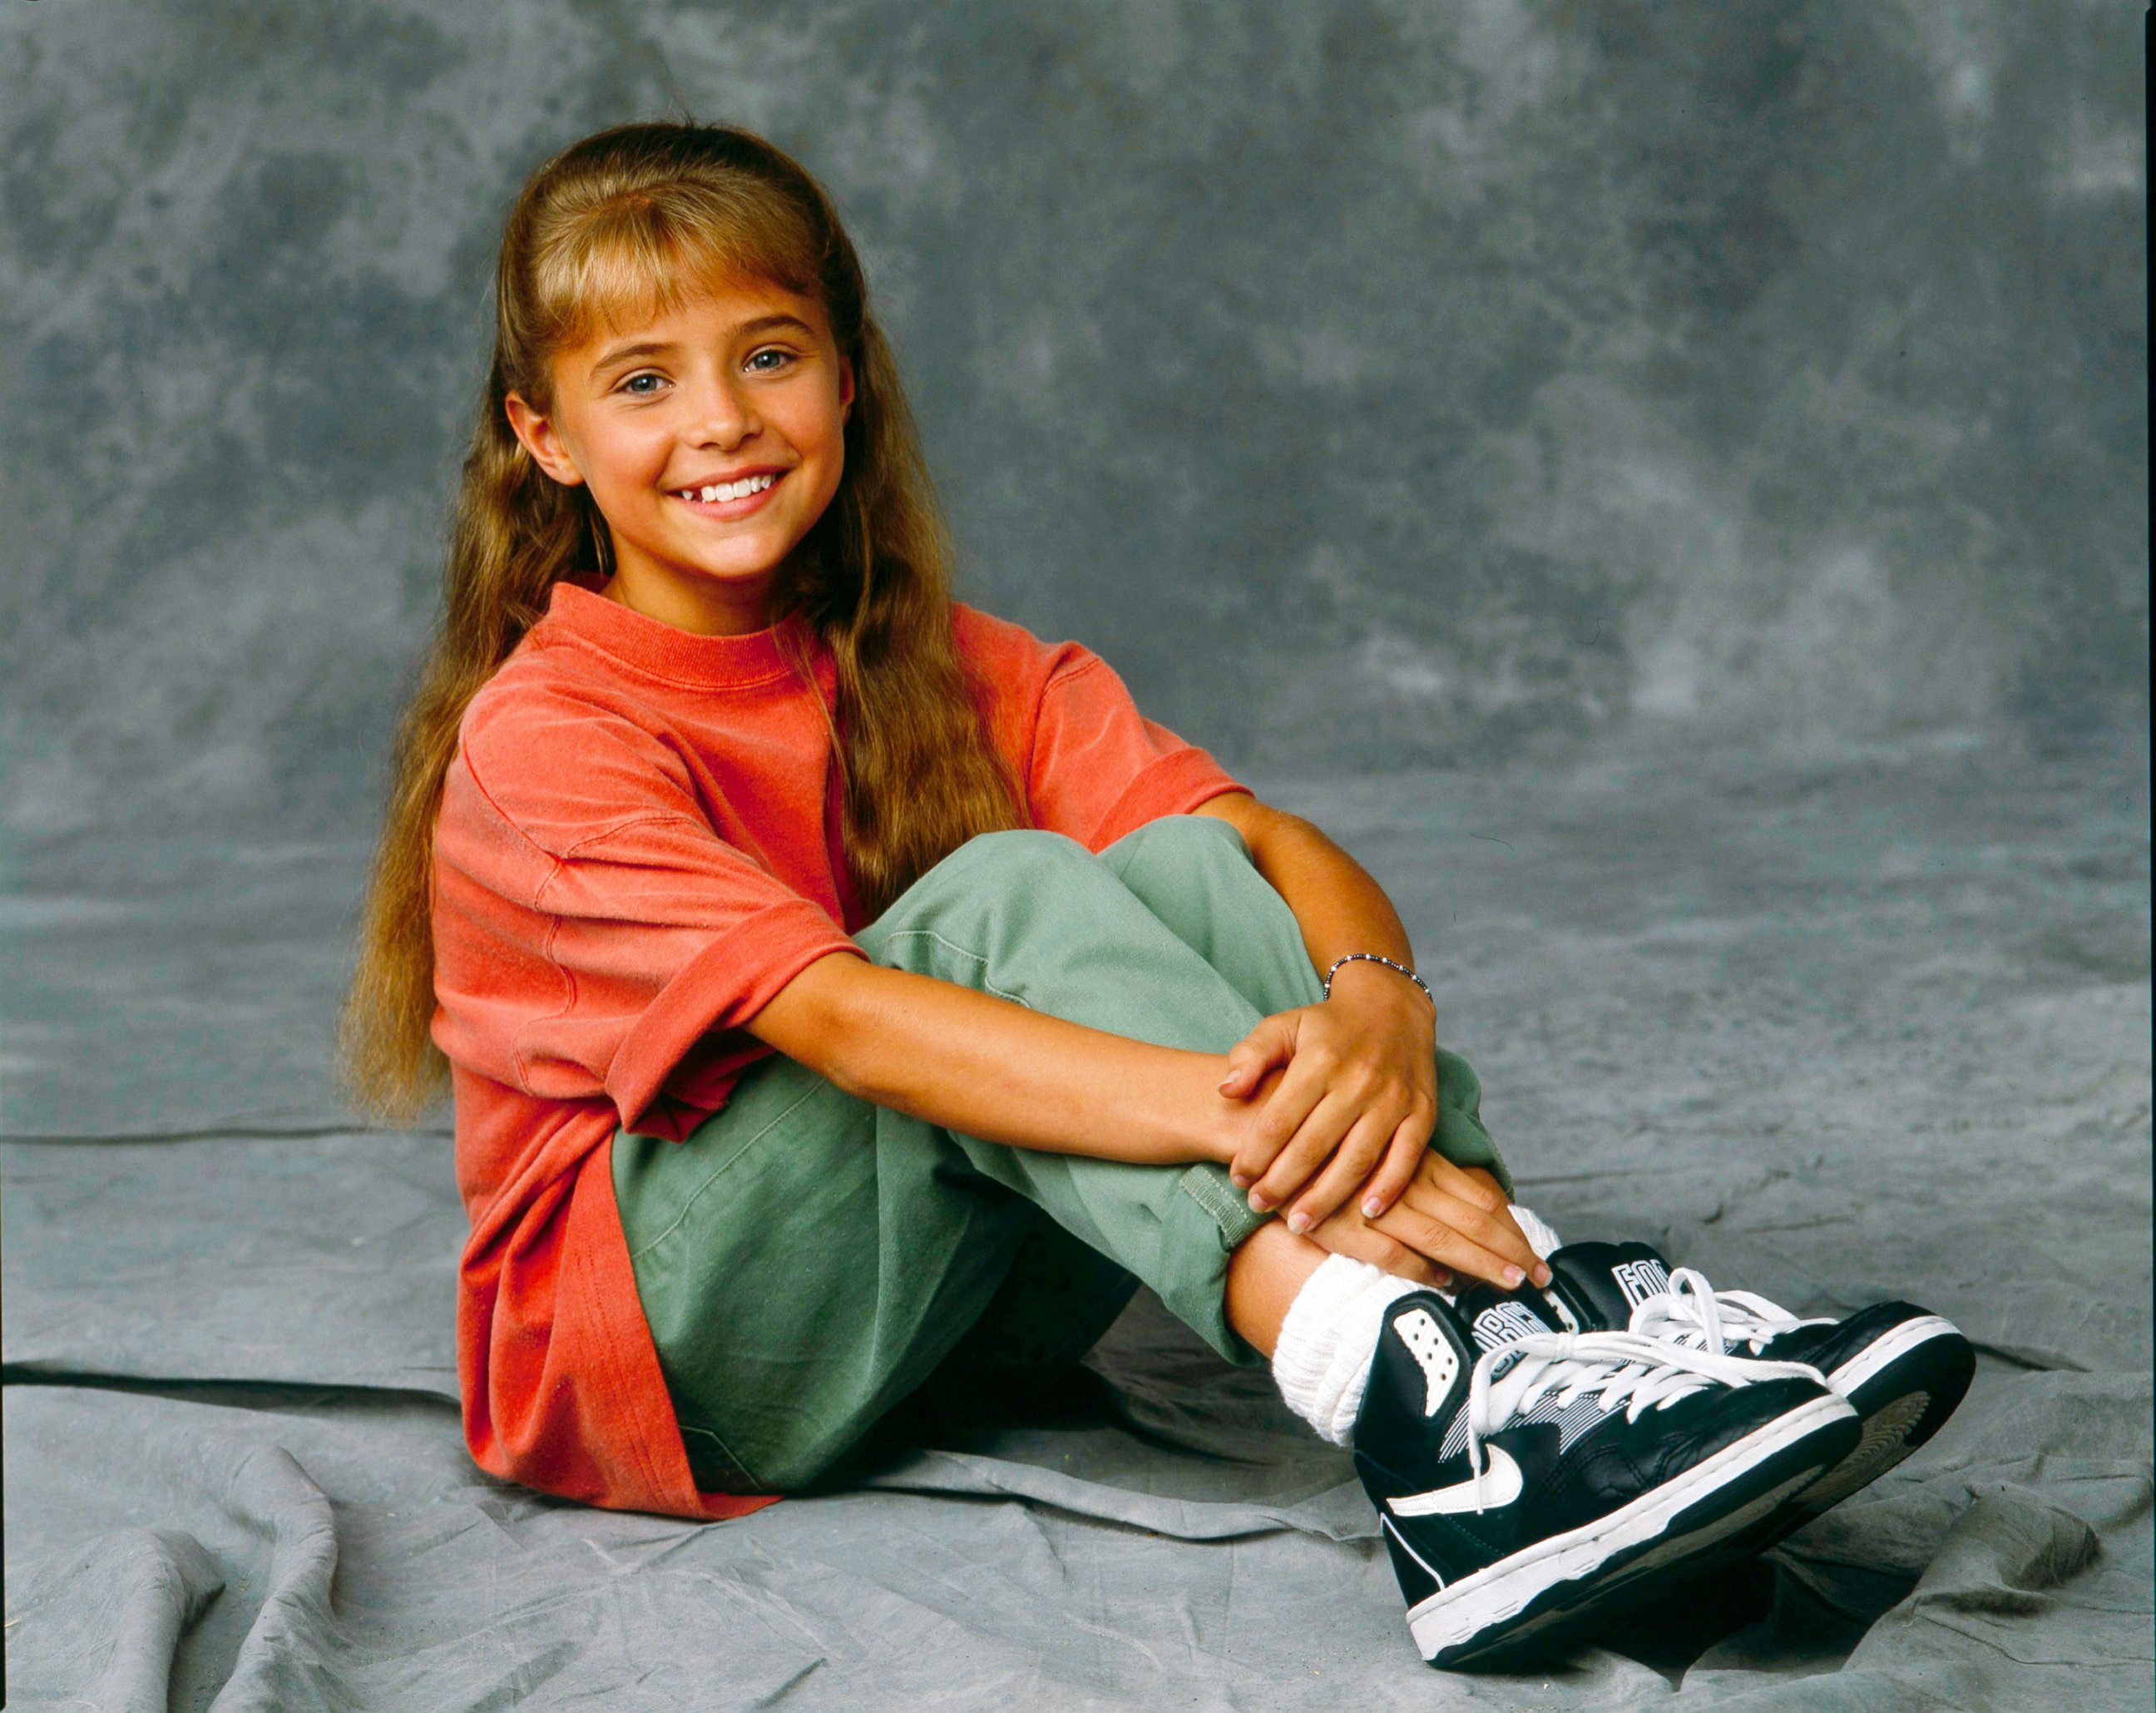 She Played Al on Step by Step. See Christine Lakin Now at 43.